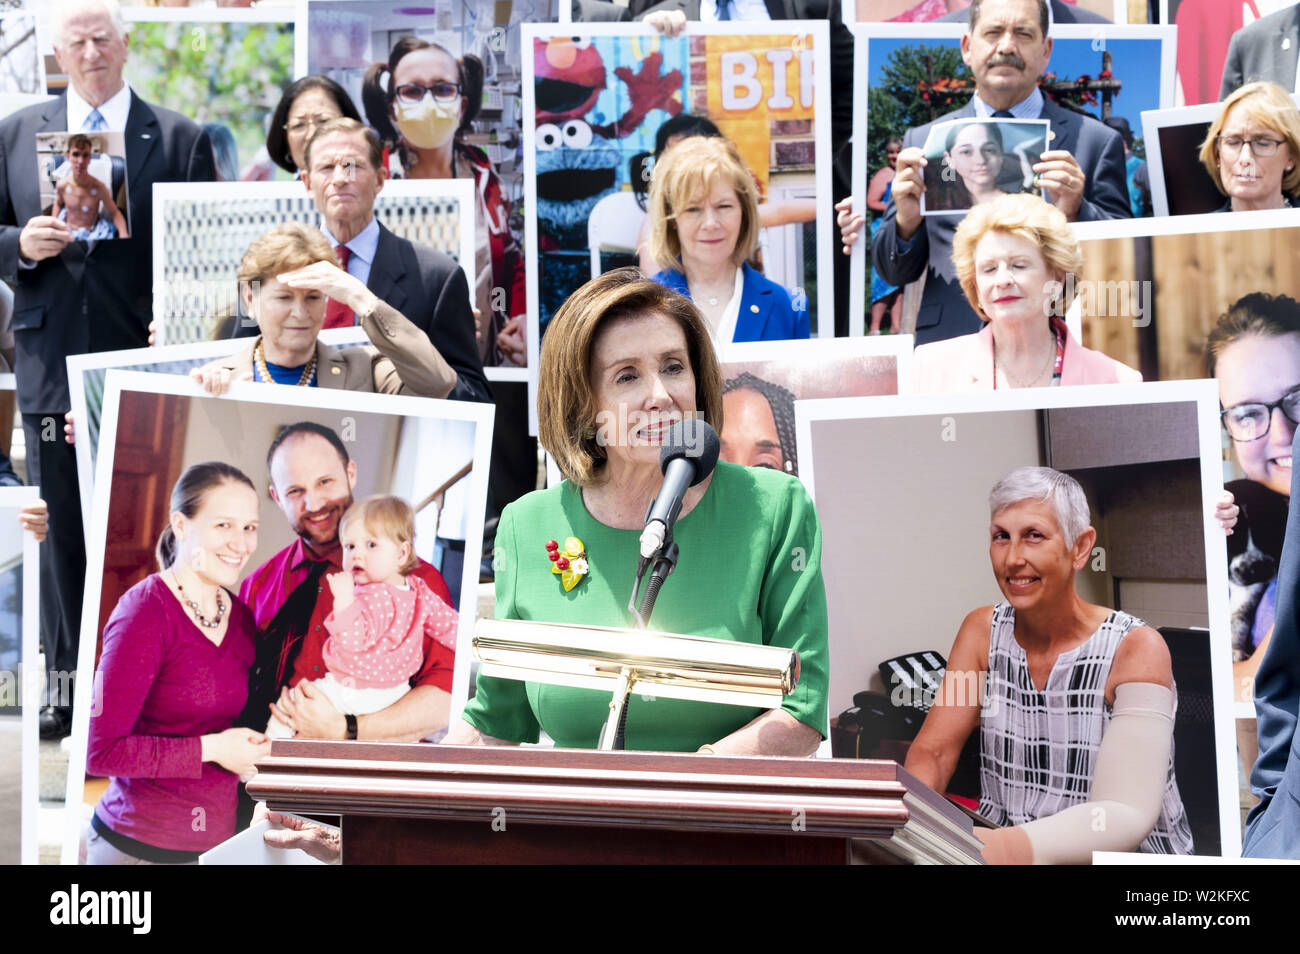 Washington, D.C, USA. 9th July, 2019. U.S. Representative NANCY PELOSI (D-CA) in front of a group of Democratic Senators and Representatives on the steps of the U.S. Capitol speaking against the ''assault on protections for people with pre-existing conditions'', on the steps of the US Capitol in Washington, DC on July 9, 2019. Credit: Michael Brochstein/ZUMA Wire/Alamy Live News Stock Photo